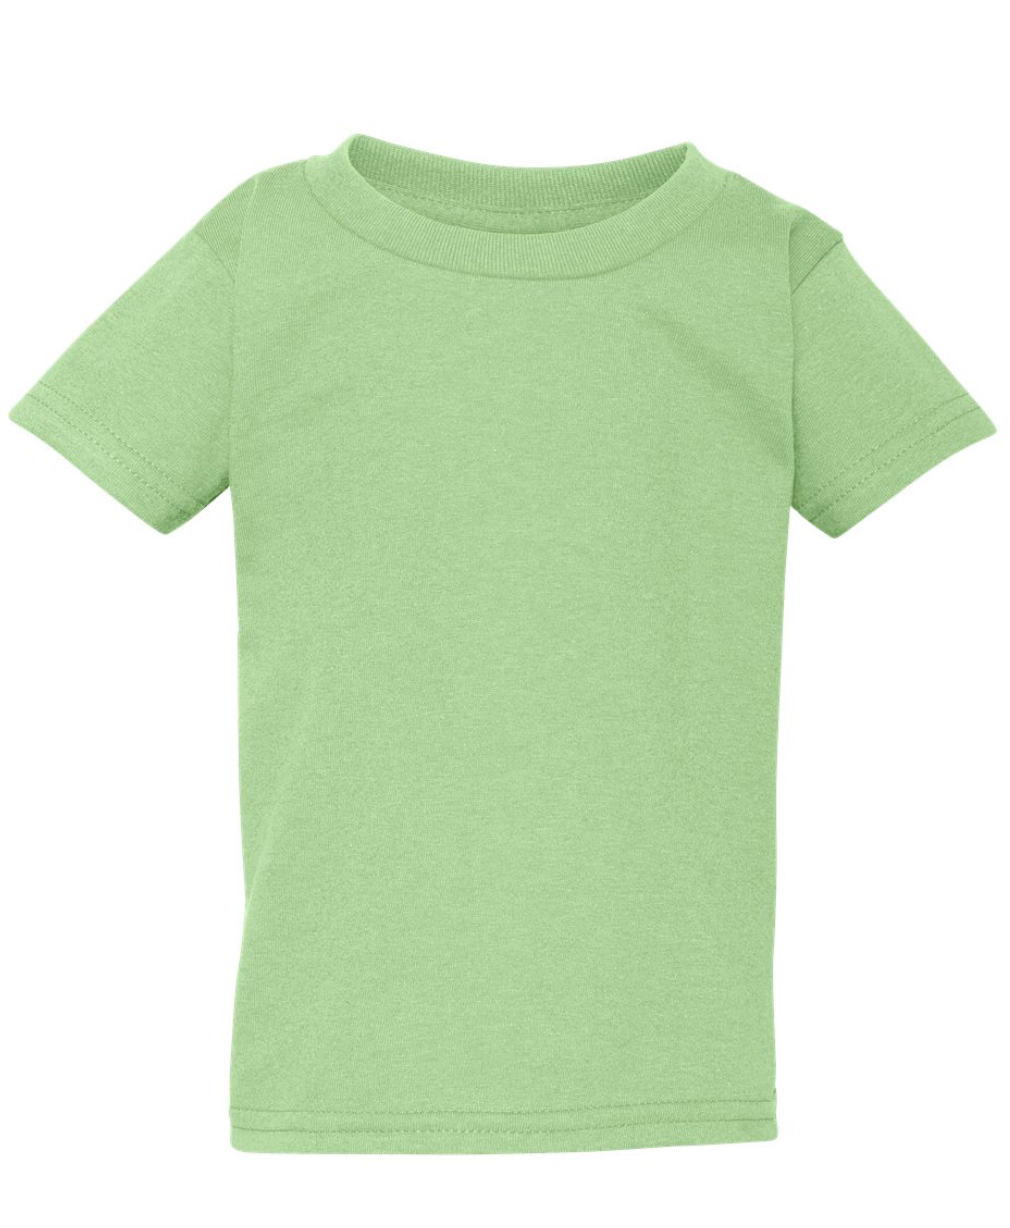 A LITTLE BIT OF DIRT NEVER HURT KIDS SHIRTS- YOUTH AND TODDLER